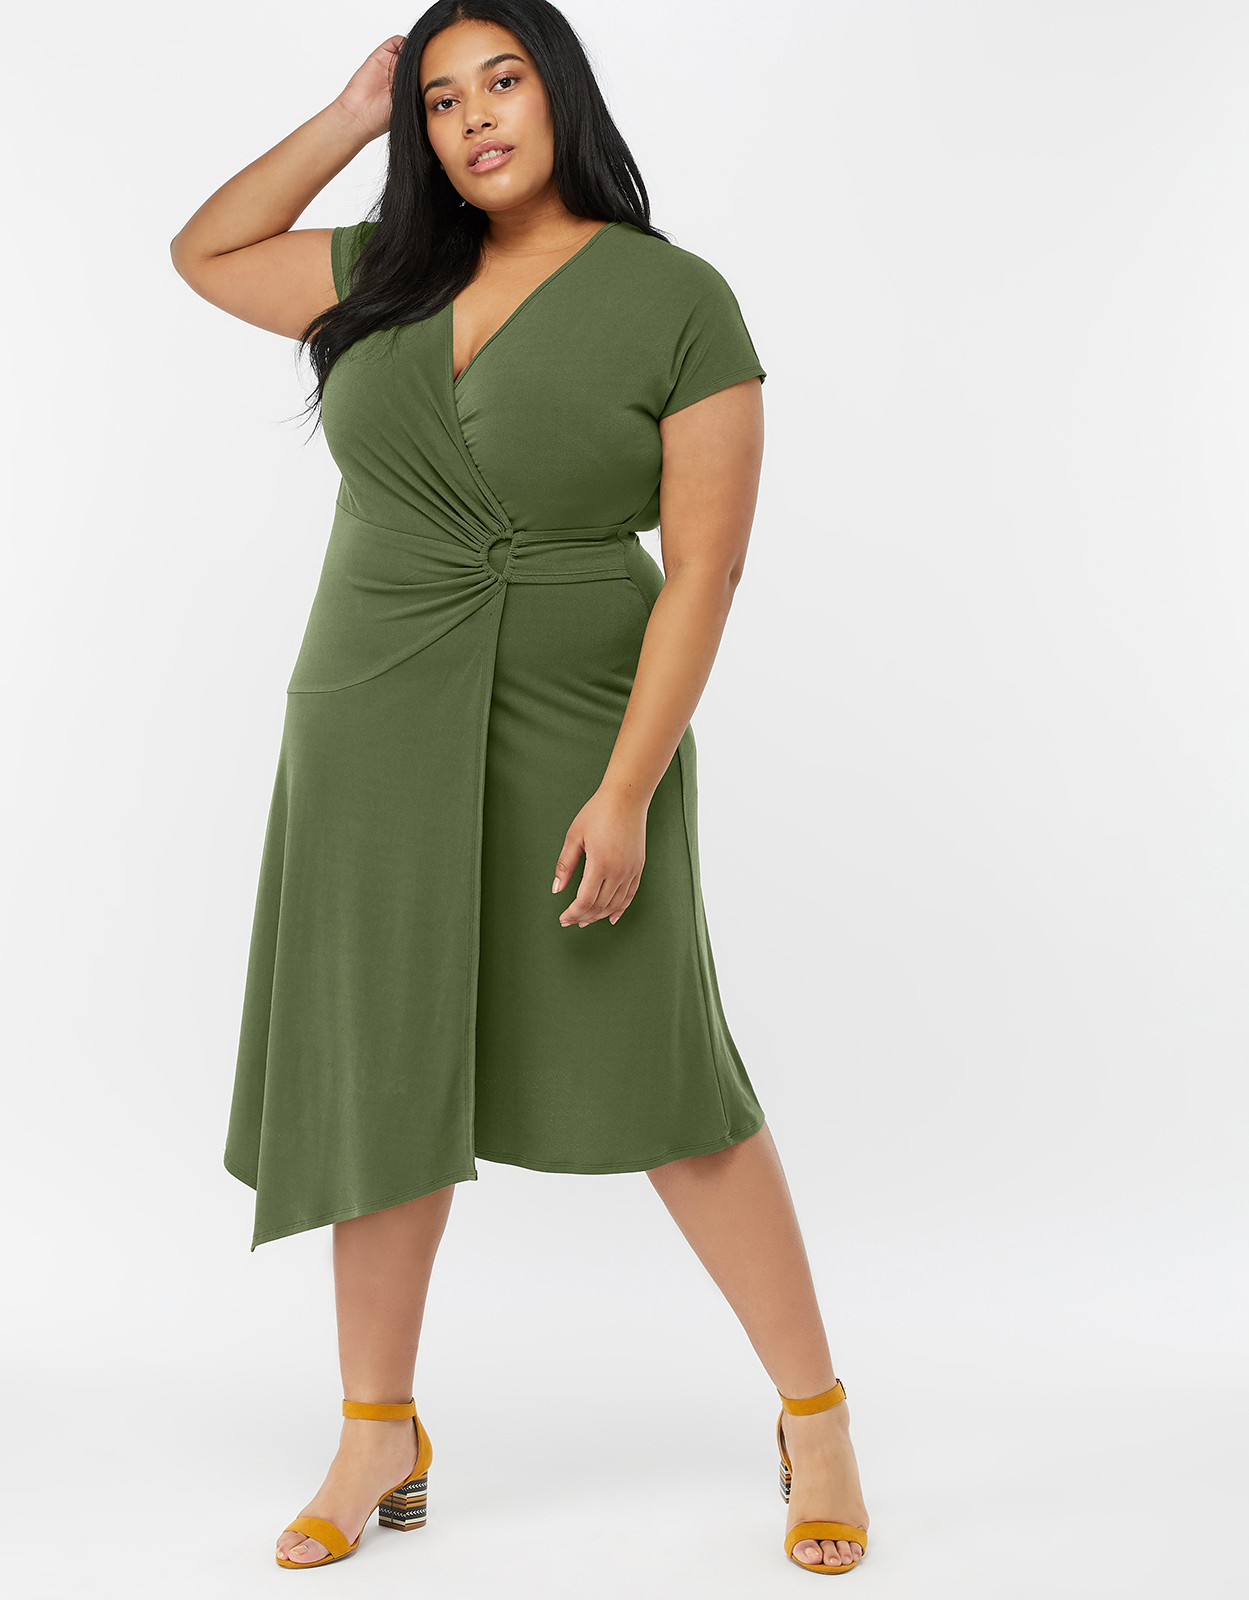 plus size outfits to wear to a wedding